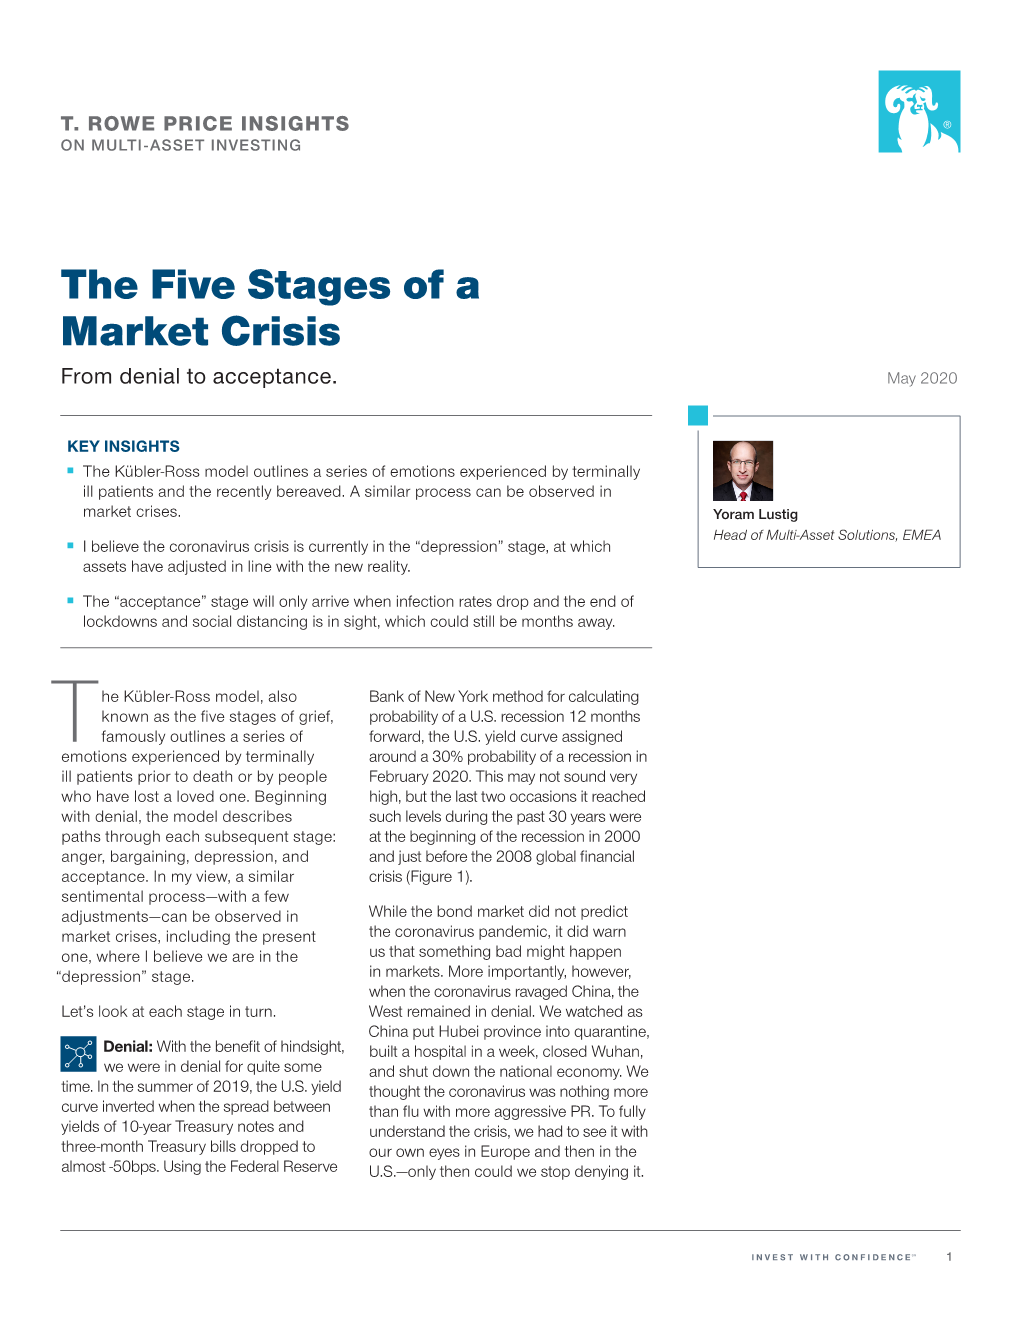 The Five Stages of a Market Crisis from Denial to Acceptance